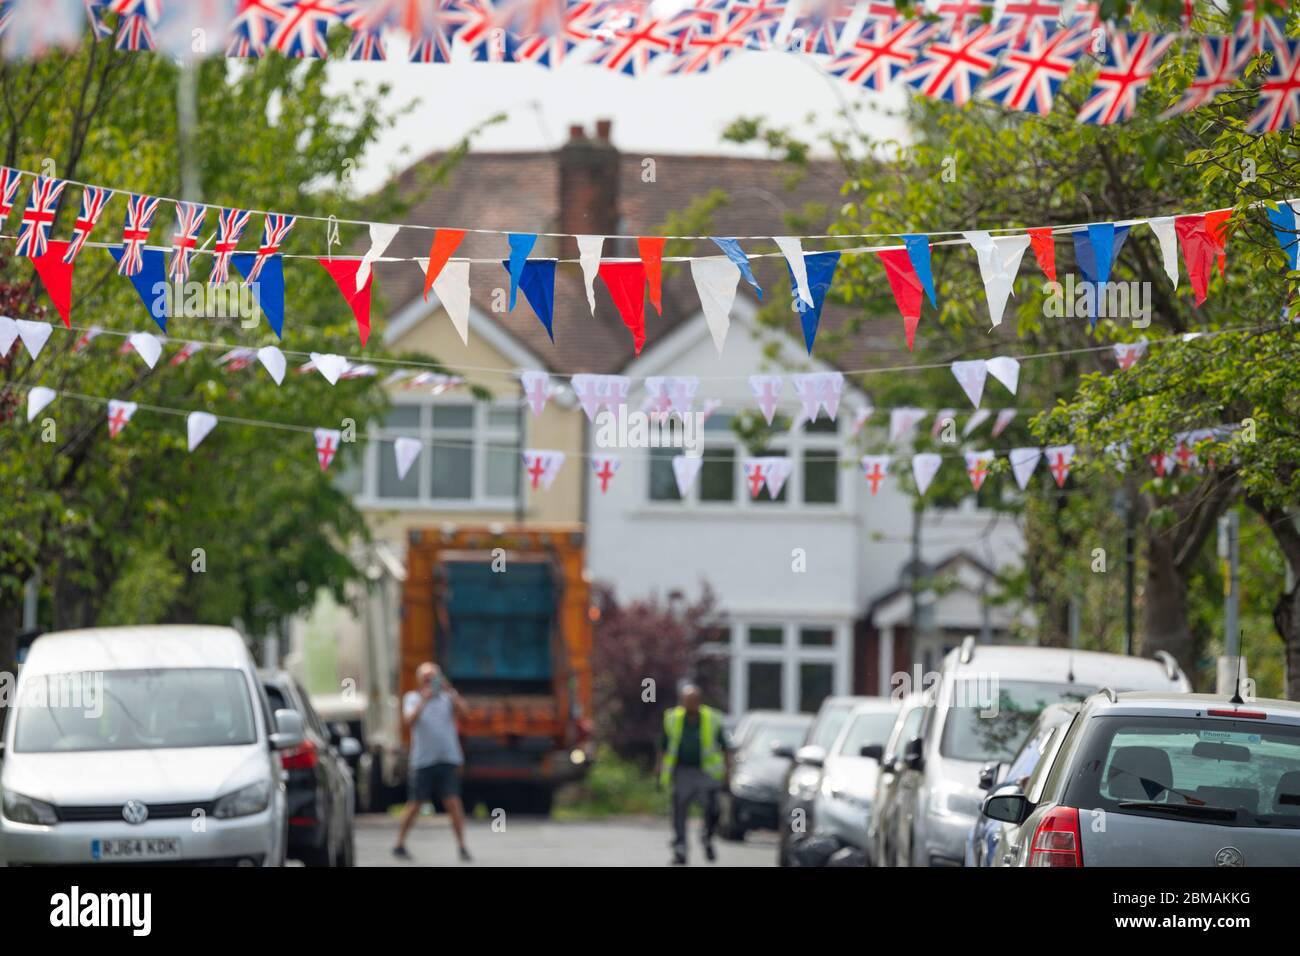 Merton Park, London, UK. 8 May 2020. Bunting along the length of a leafy south London street on day 46 of the Coronavirus lockdown to commemorate the 75th anniversary of VE Day is organised by AFC Wimbledon Foundation Dons Local Action in conjunction with Old Rutlishians whose rugby club borders the street in Merton Park. Unfortunately the low slung bunting interferes with the day’s local refuse collection lorry which inadvertently brings down the first span of flags before reversing. Credit: Malcolm Park/Alamy Live News. Stock Photo